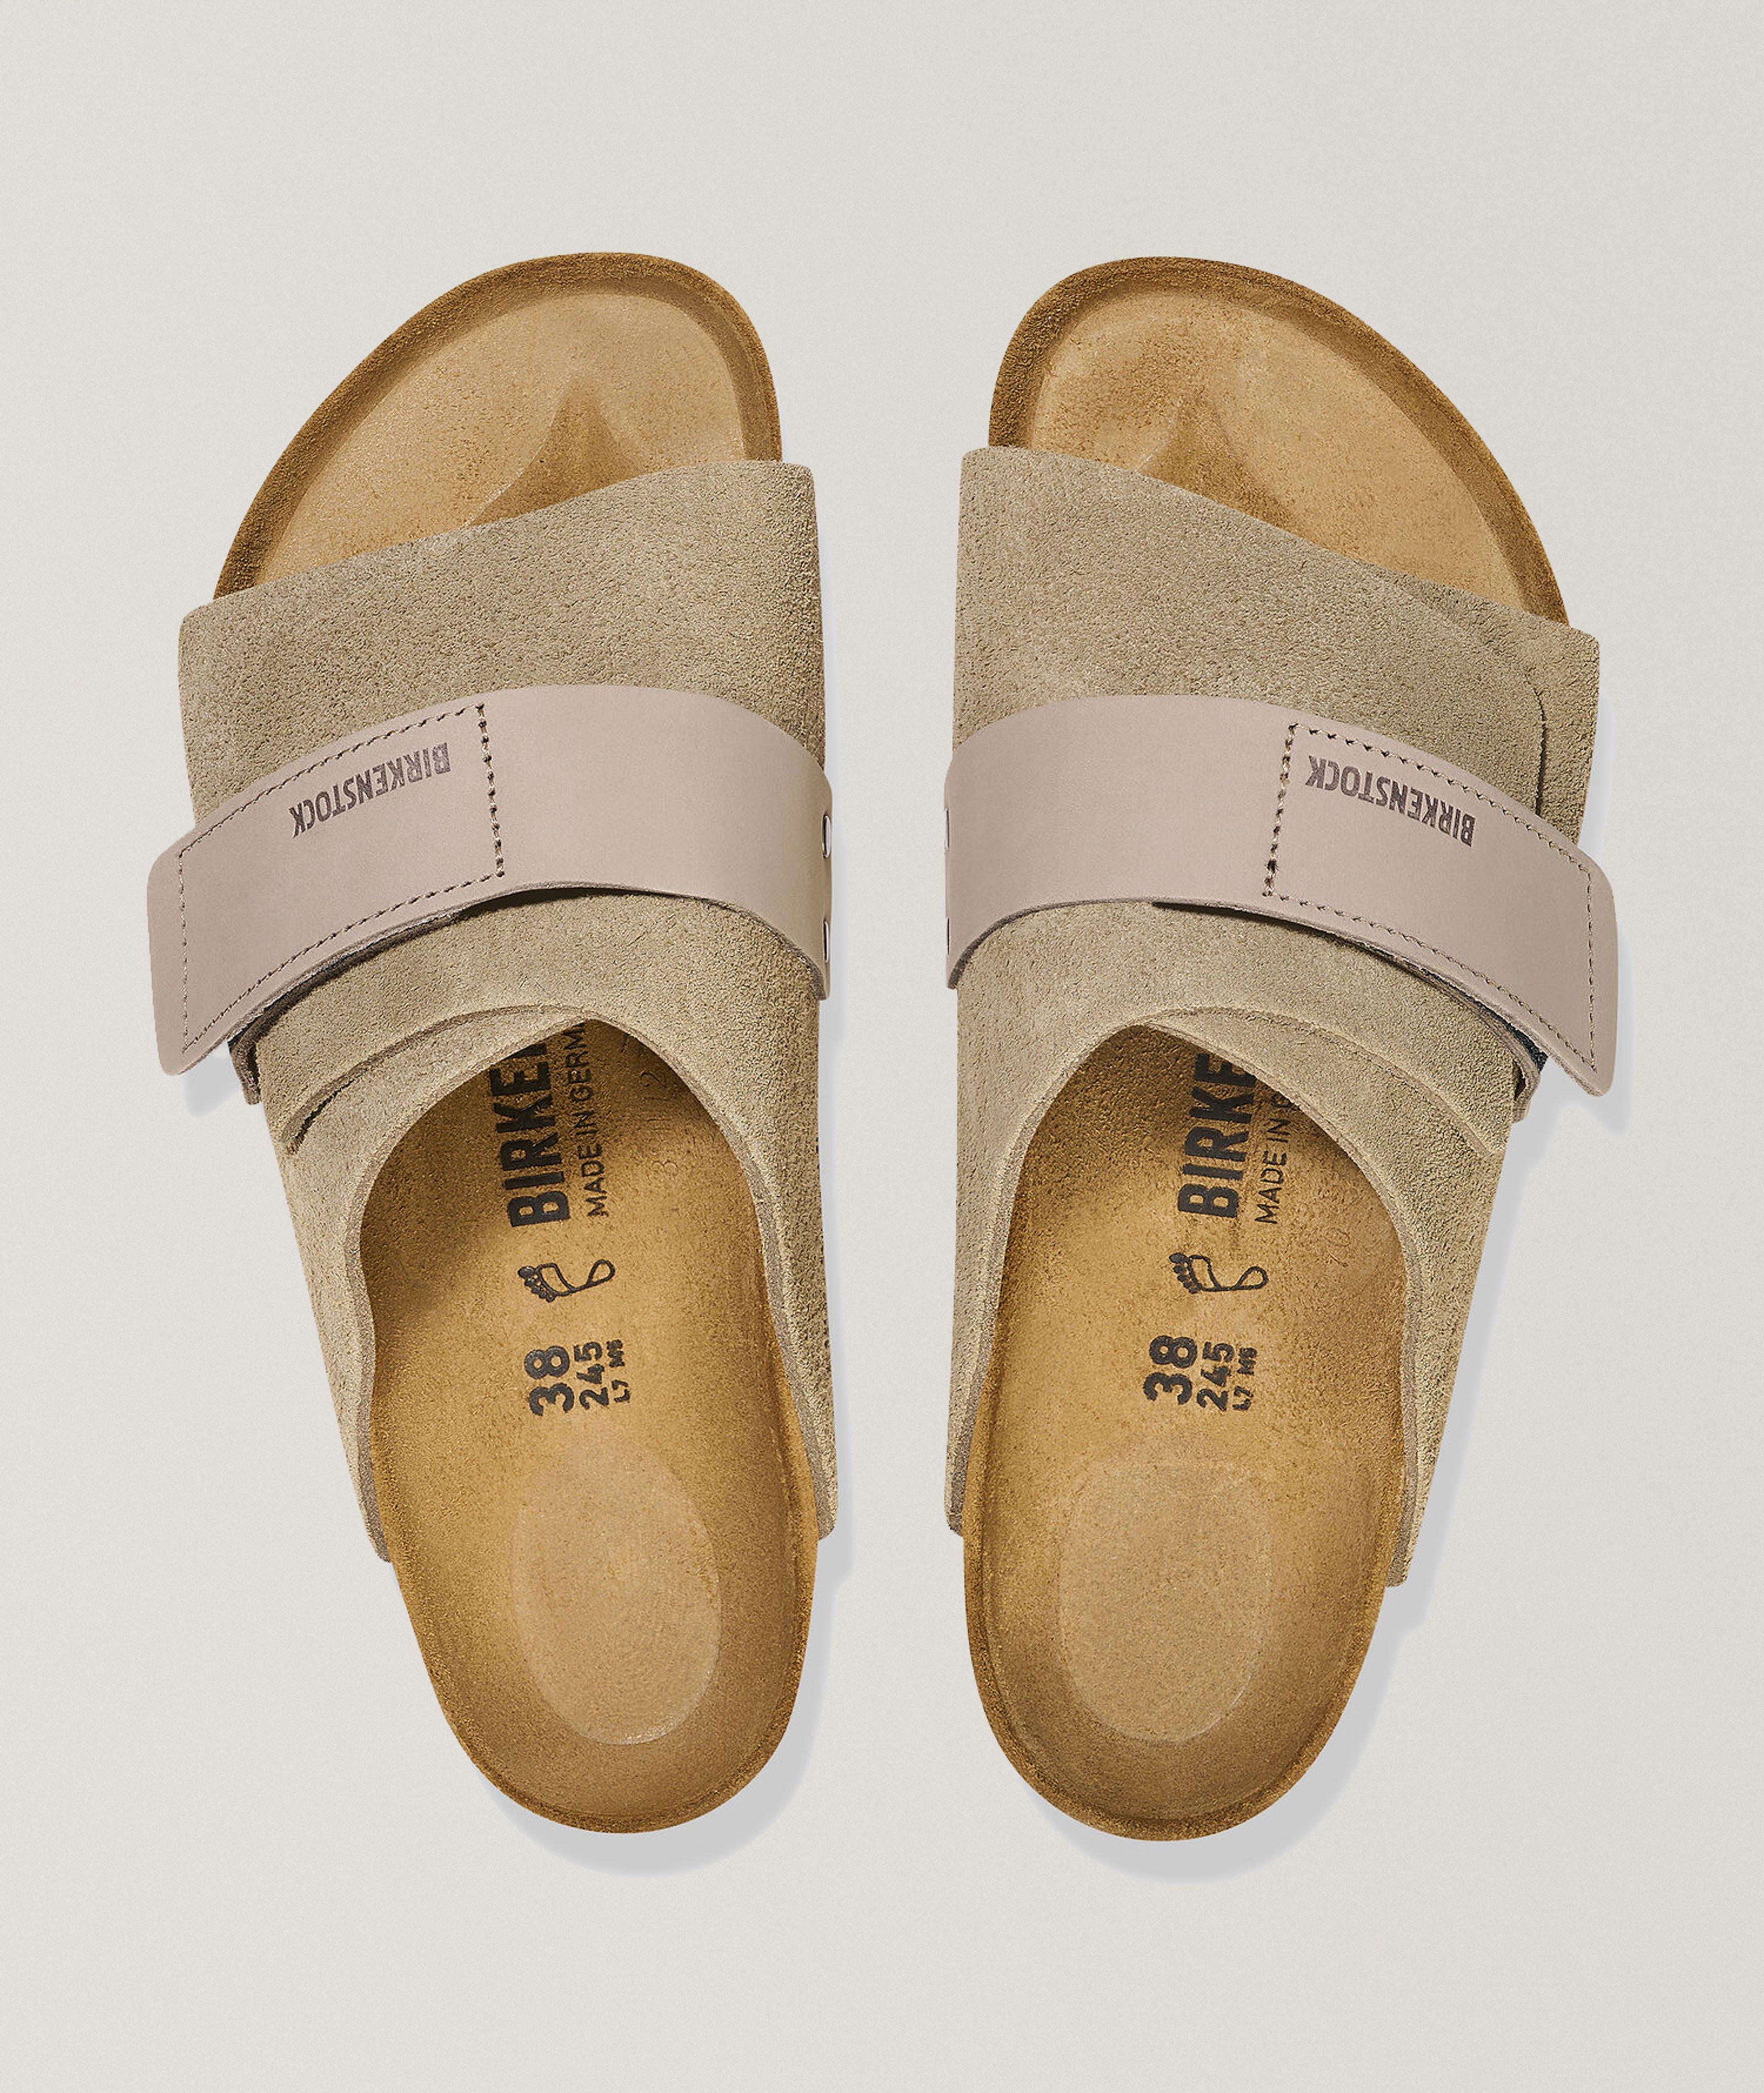 Kyoto Nubuck & Suede Leather Sandals